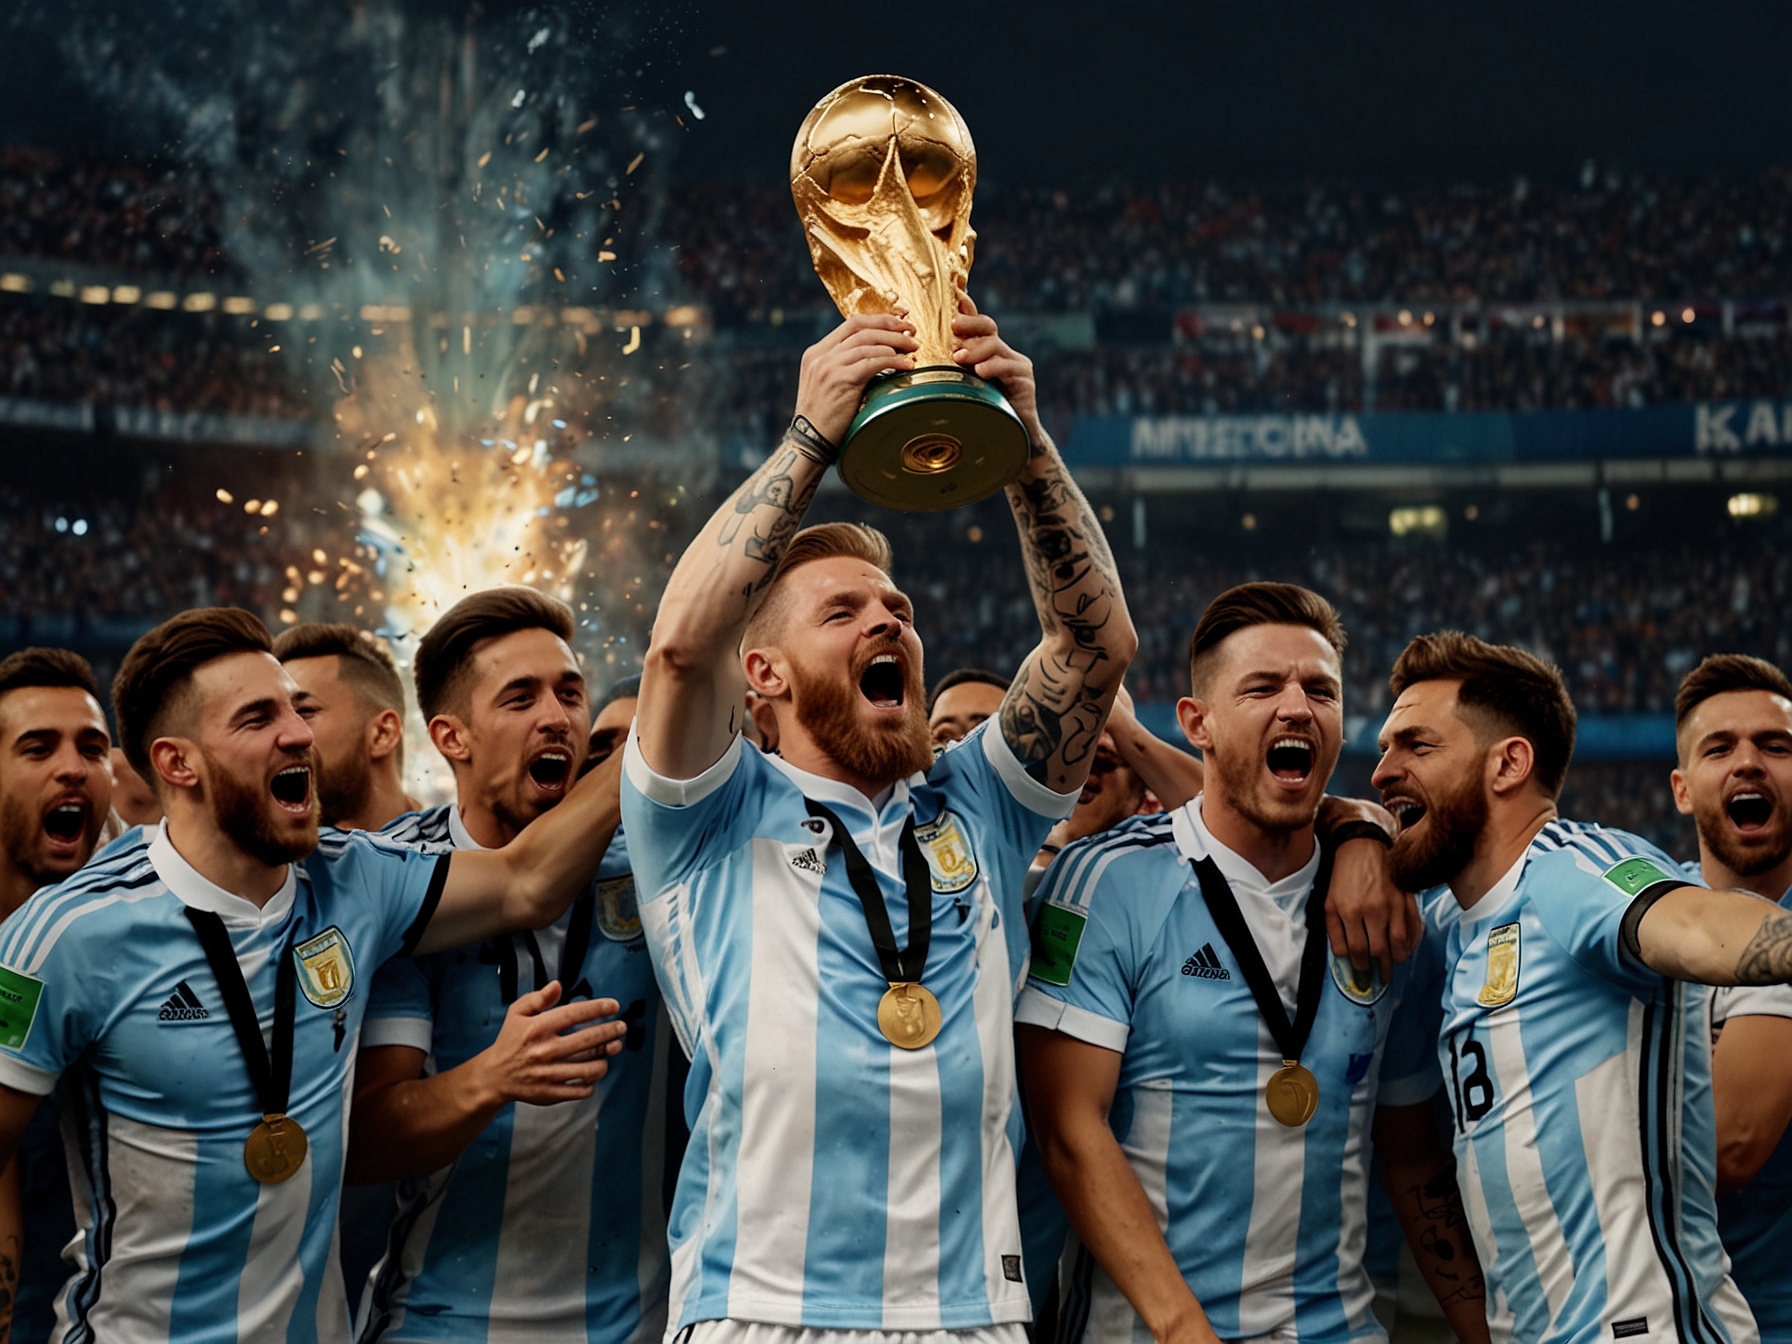 Argentina's national football team celebrates a victory, showcasing their potential to win the Copa America. This image symbolizes McGregor's faith in the team's abilities.